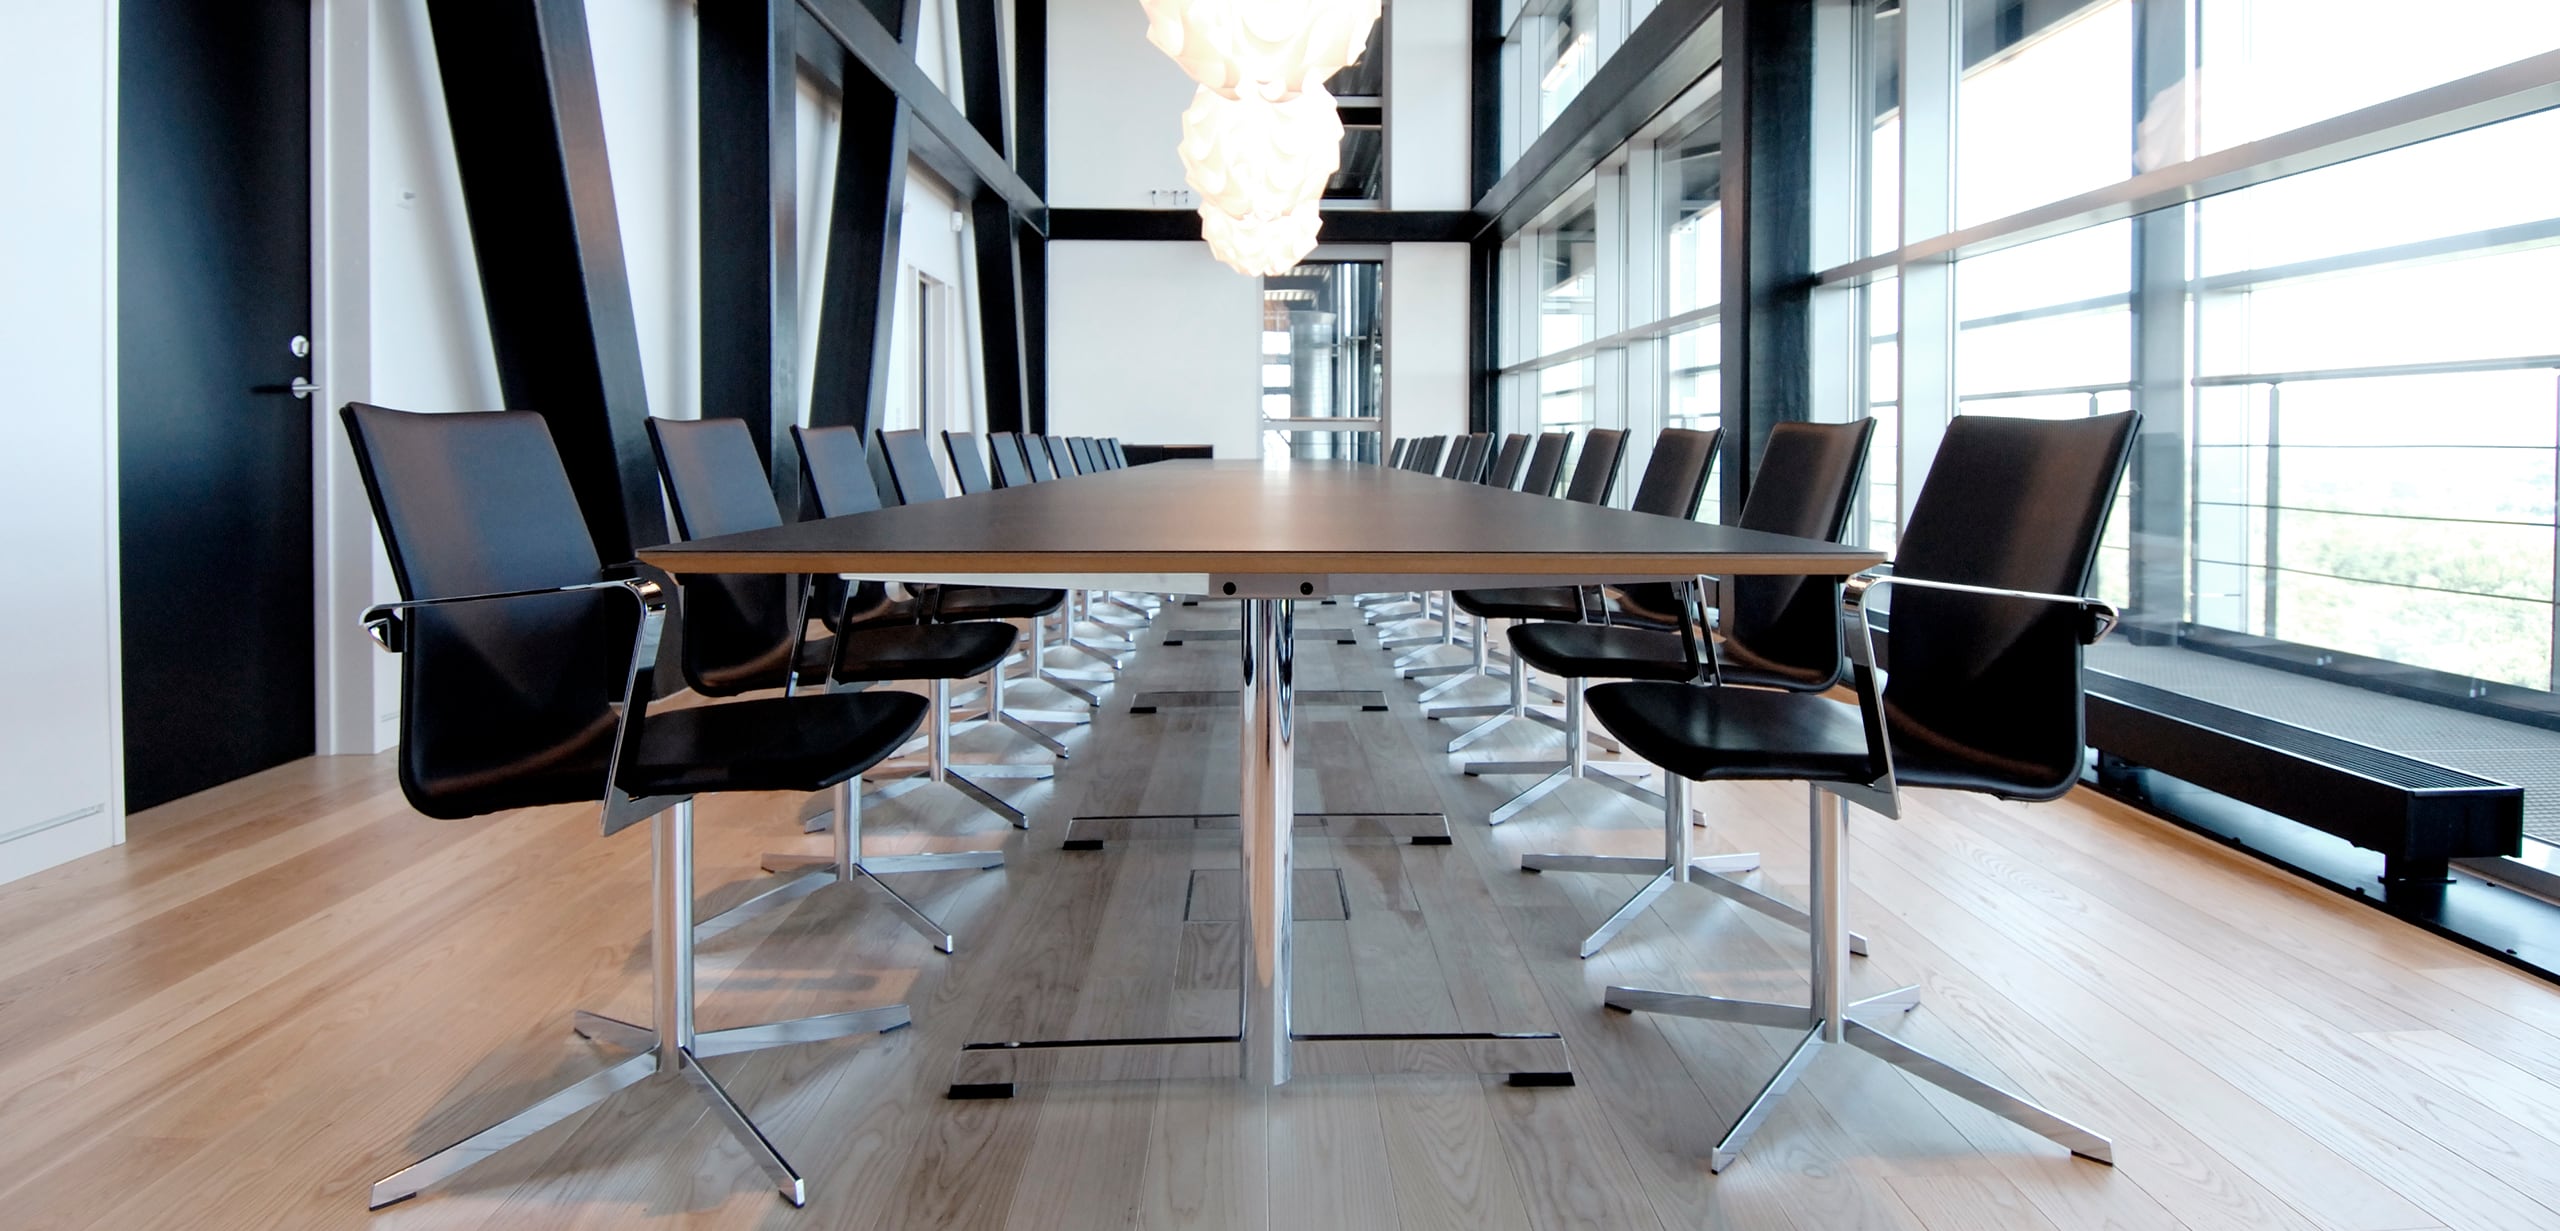 A conference table with black chairs in a large room.